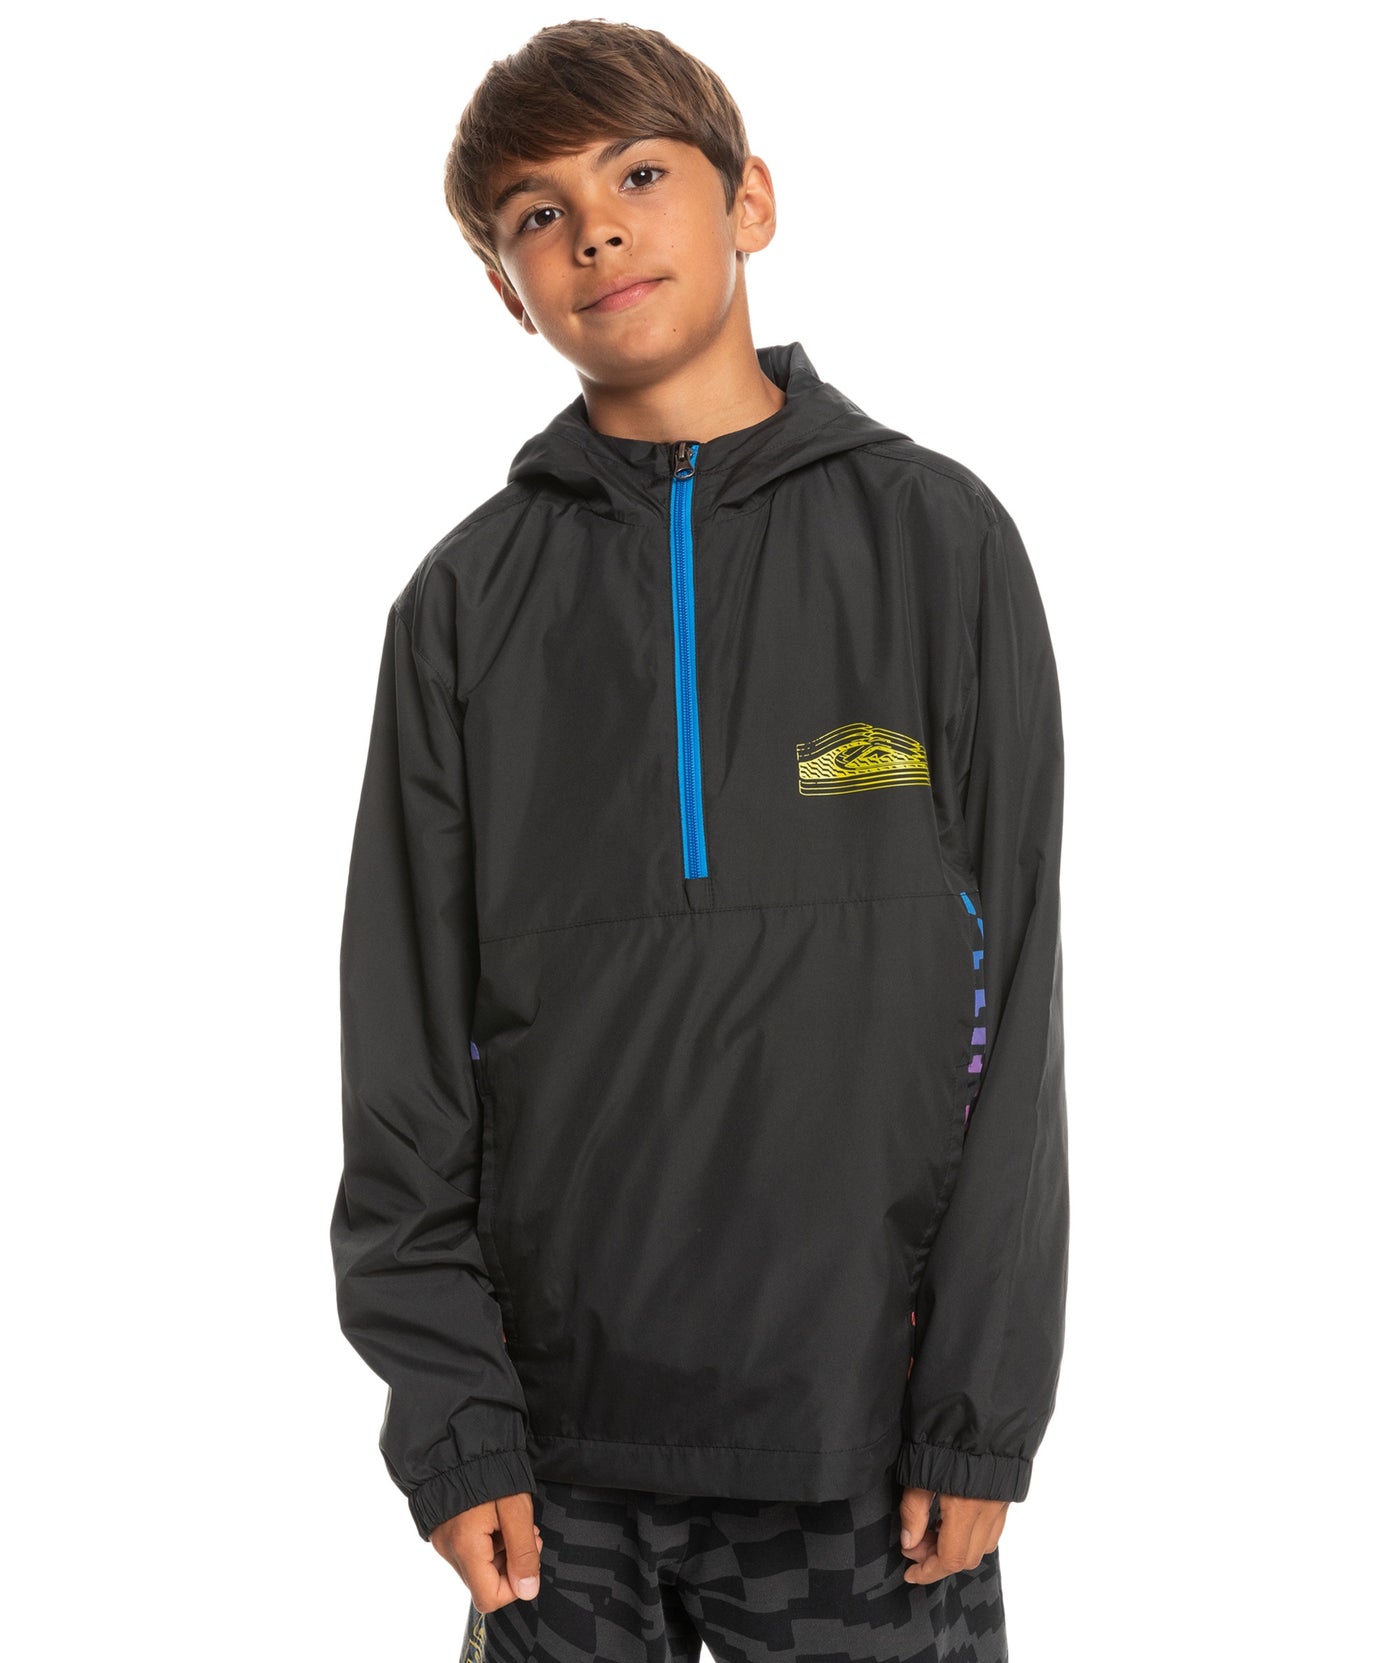 Quiksilver Radical Times Youth Jacket